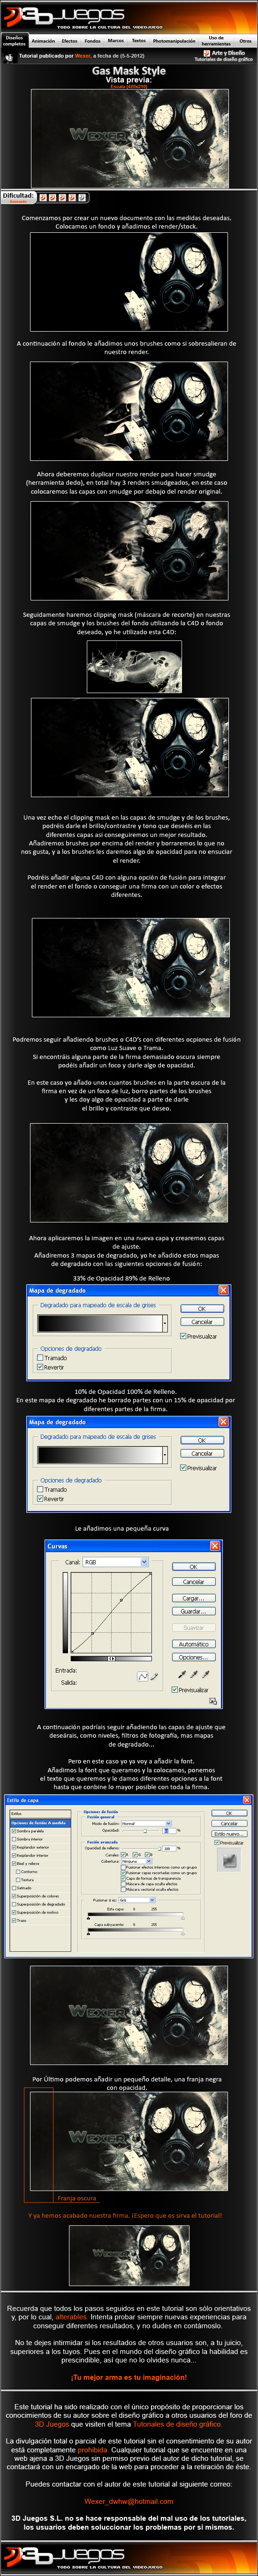 tutorial_gas_mask_style_by_wexxer-d4yotdb.png